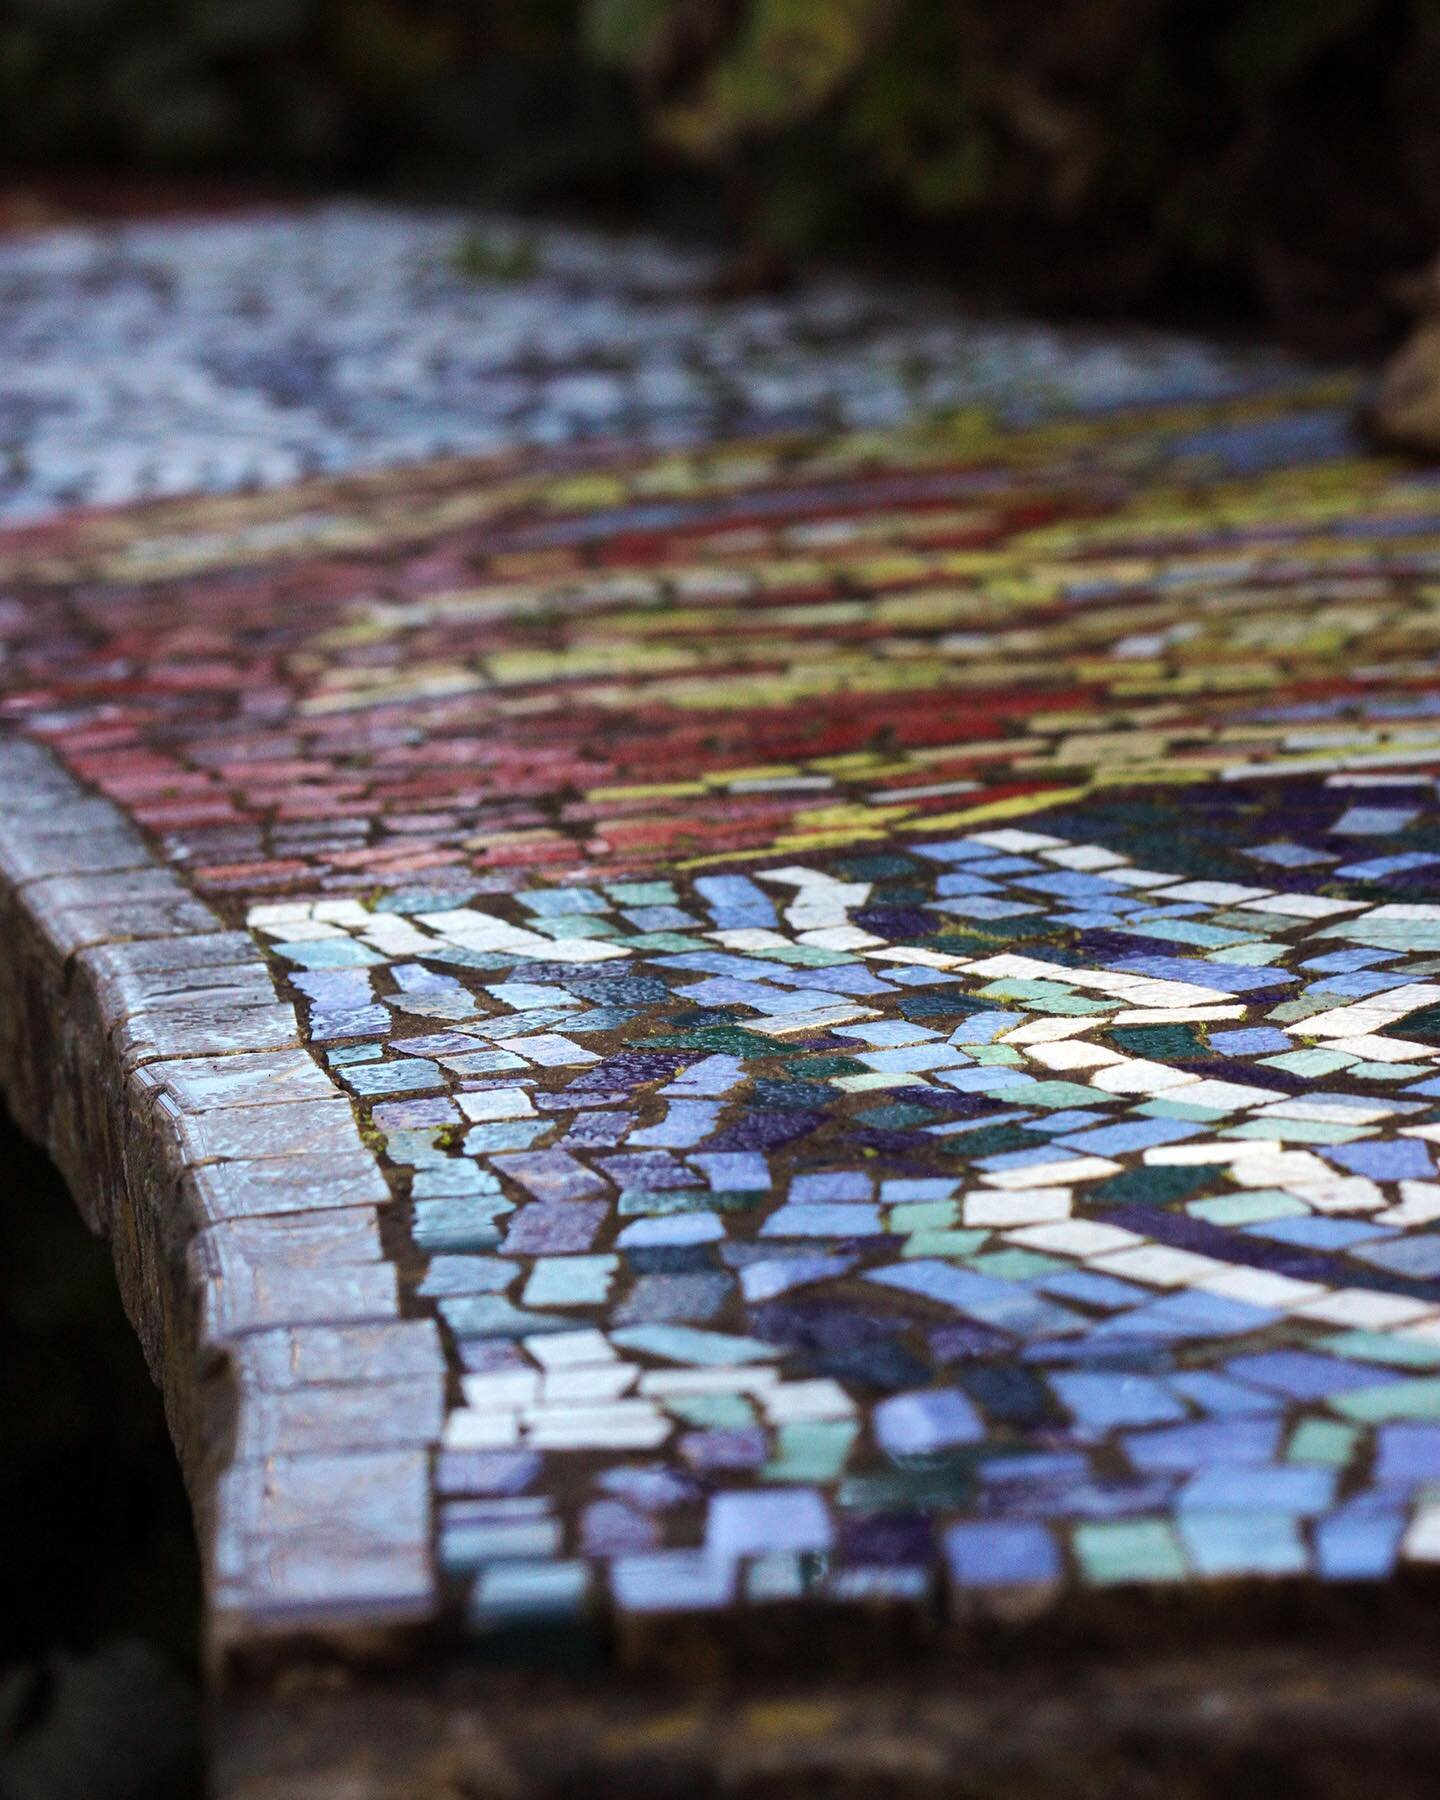 This close up photo was taken by Delilah during a recent individual lesson at @ceresbrunswick.
She has captured the detail and repetition of the mosaic so effectively, with a lovely use of shallow depth of field. And what&rsquo;s also impressive is t